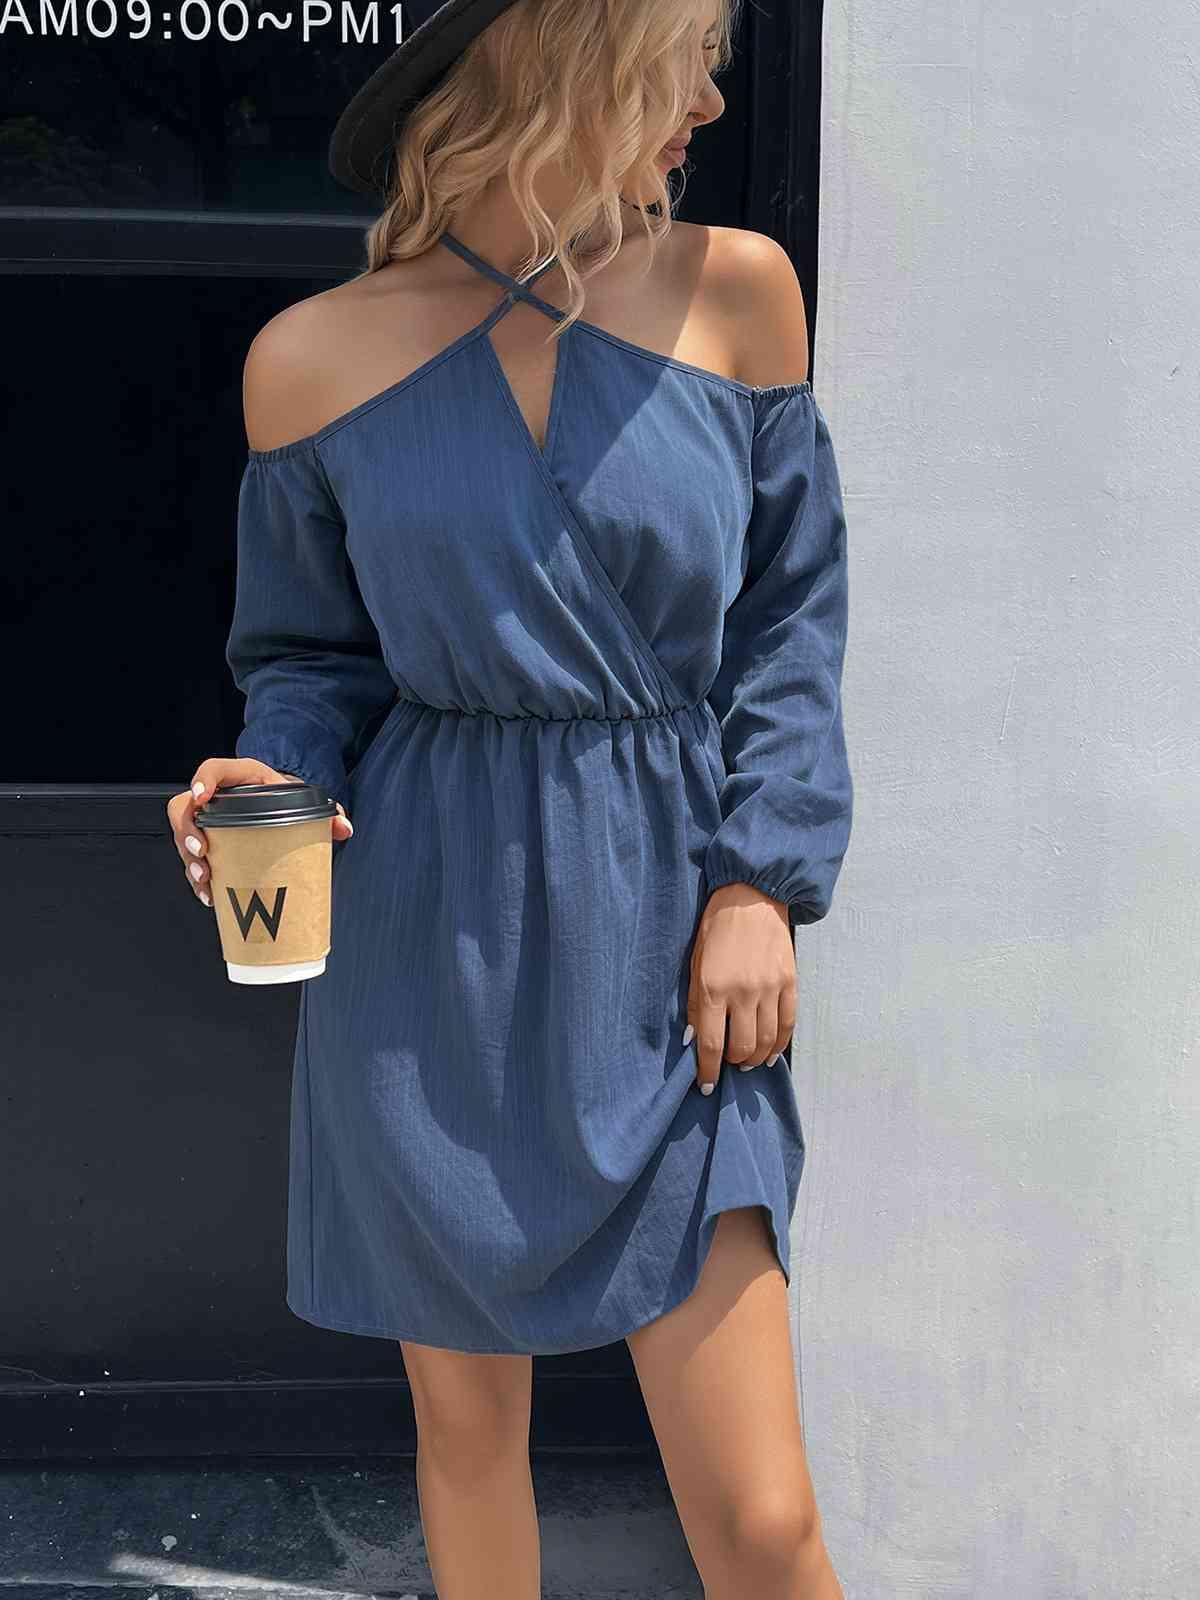 a woman in a blue dress holding a cup of coffee